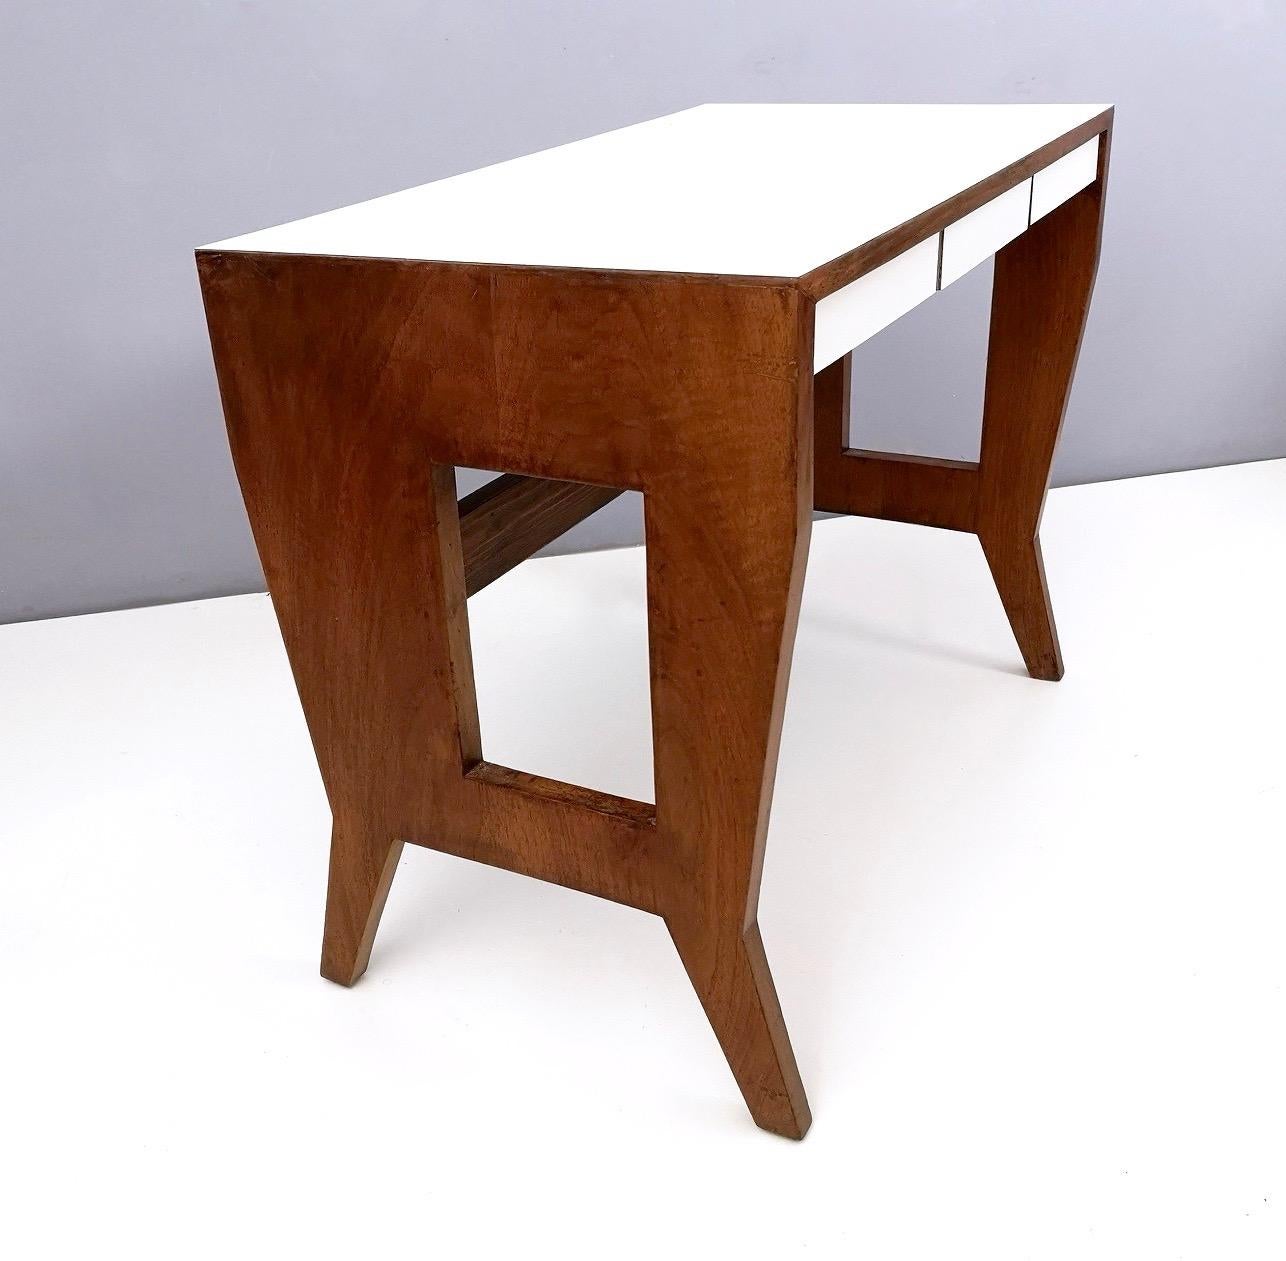 Solid Walnut Writing Desk by Gio Ponti for the University of Padova, Italy 1